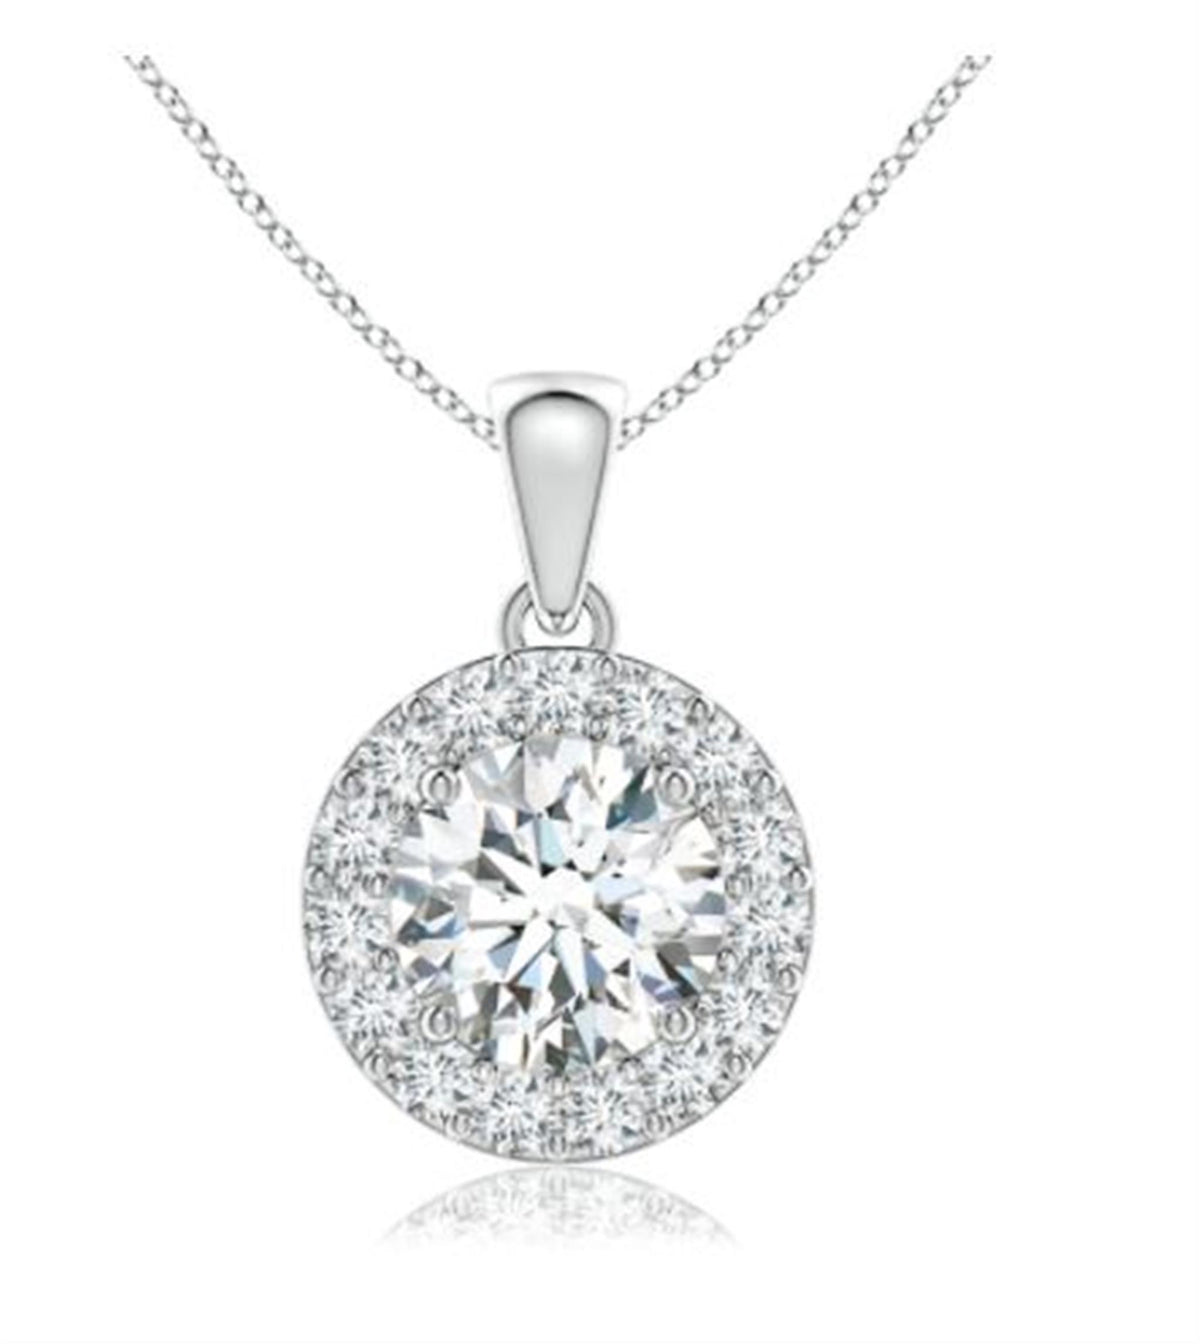 18Kt White Gold Halo Pendant With  1.41cttw Natural Diamonds